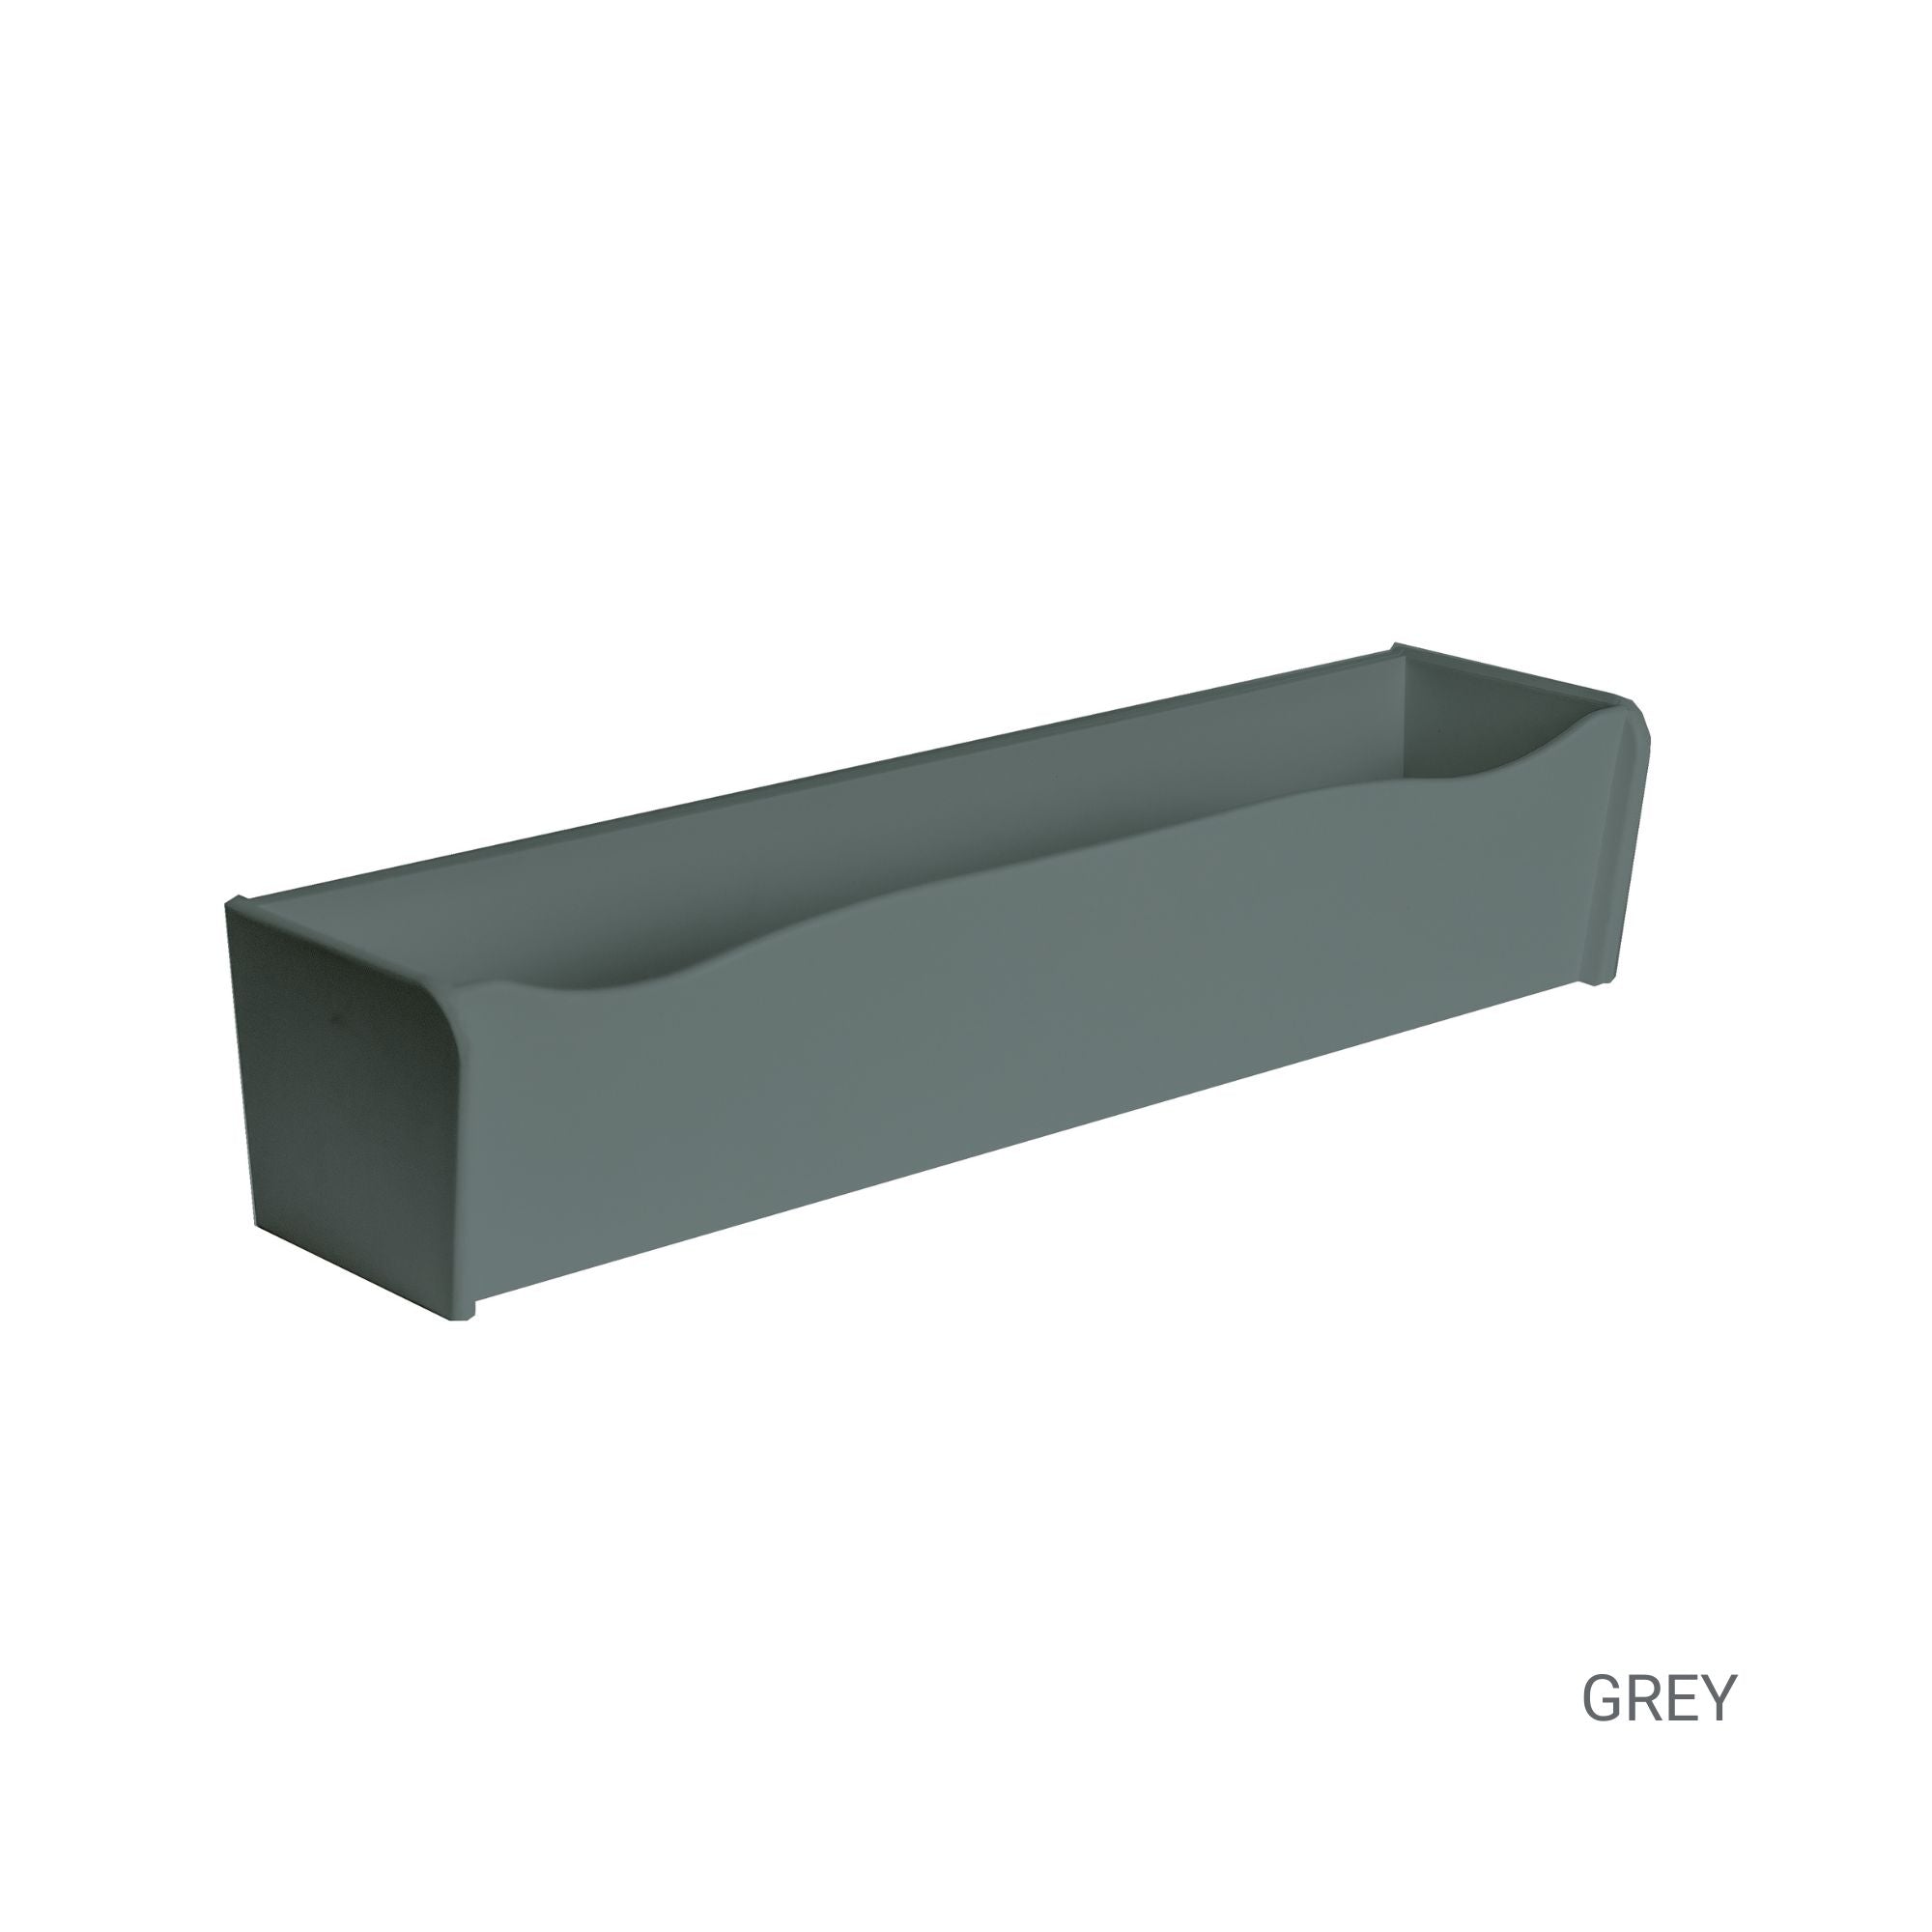 24" x 6" x 5" Grey Flower Box for Window Sills, Sheds, Playhouses, and MORE